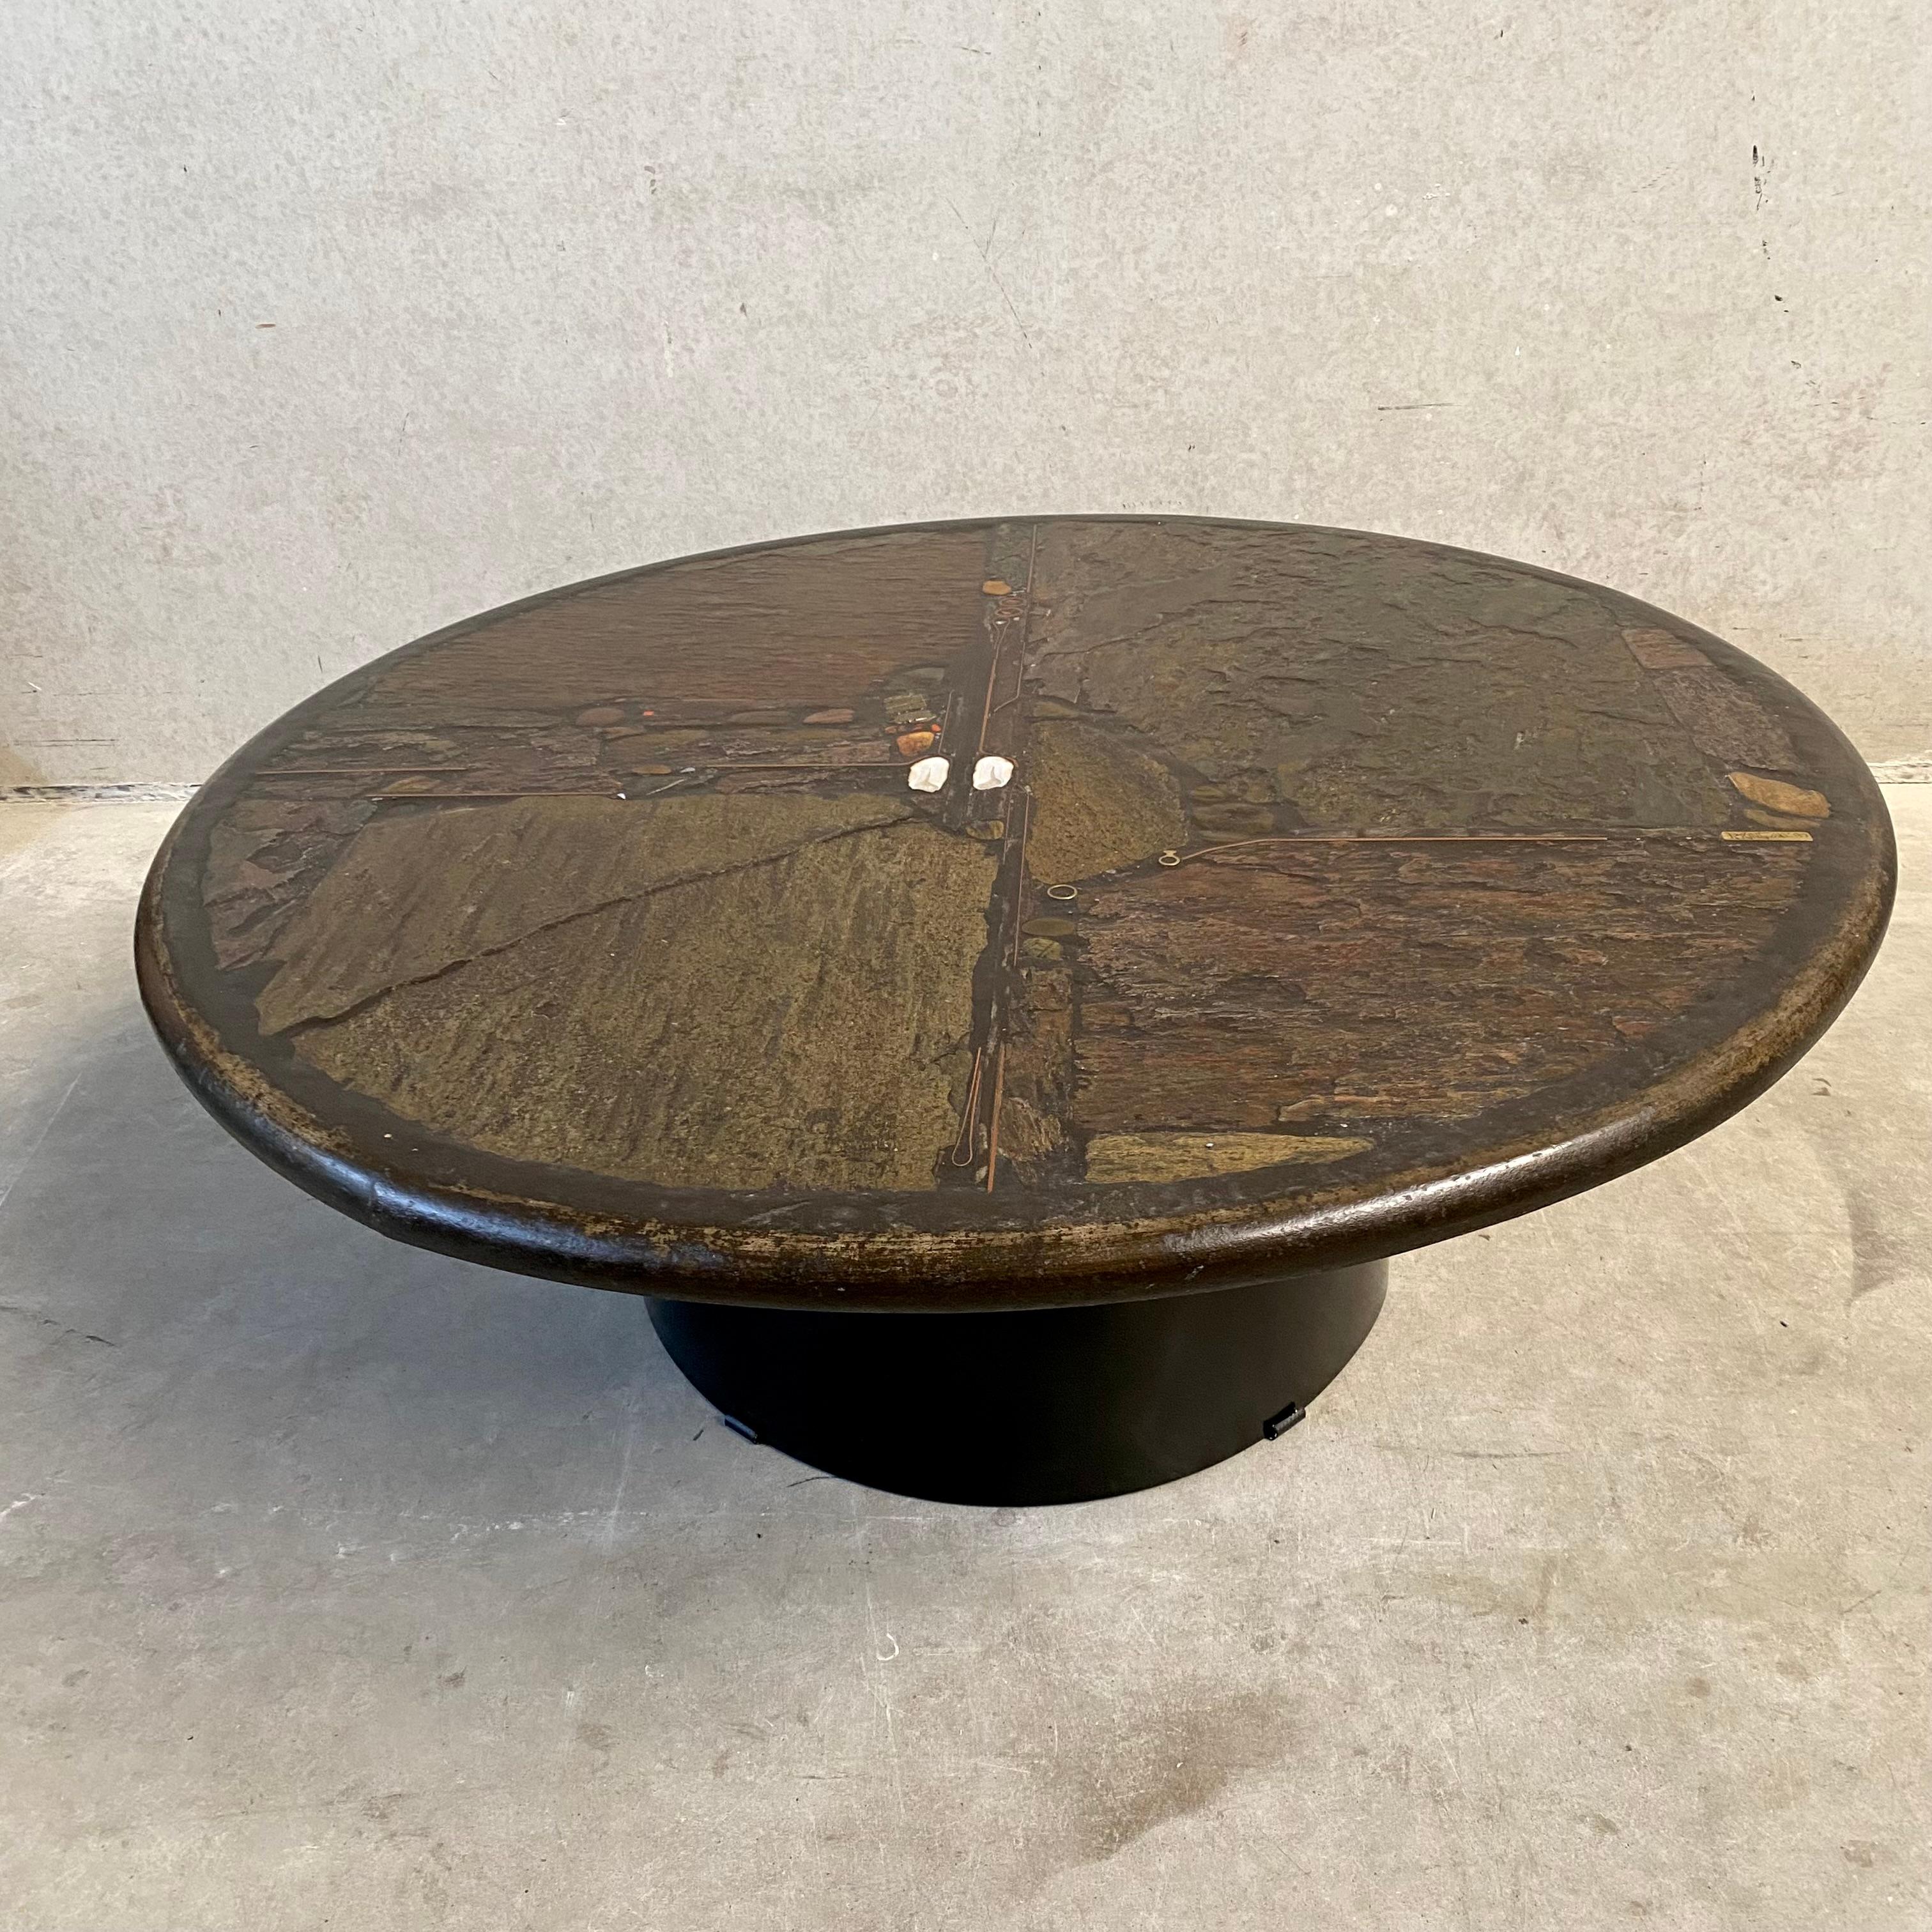 Dutch Brutalist Round Coffee Table by Sculptor Paul Kingma, Netherlands, 1989